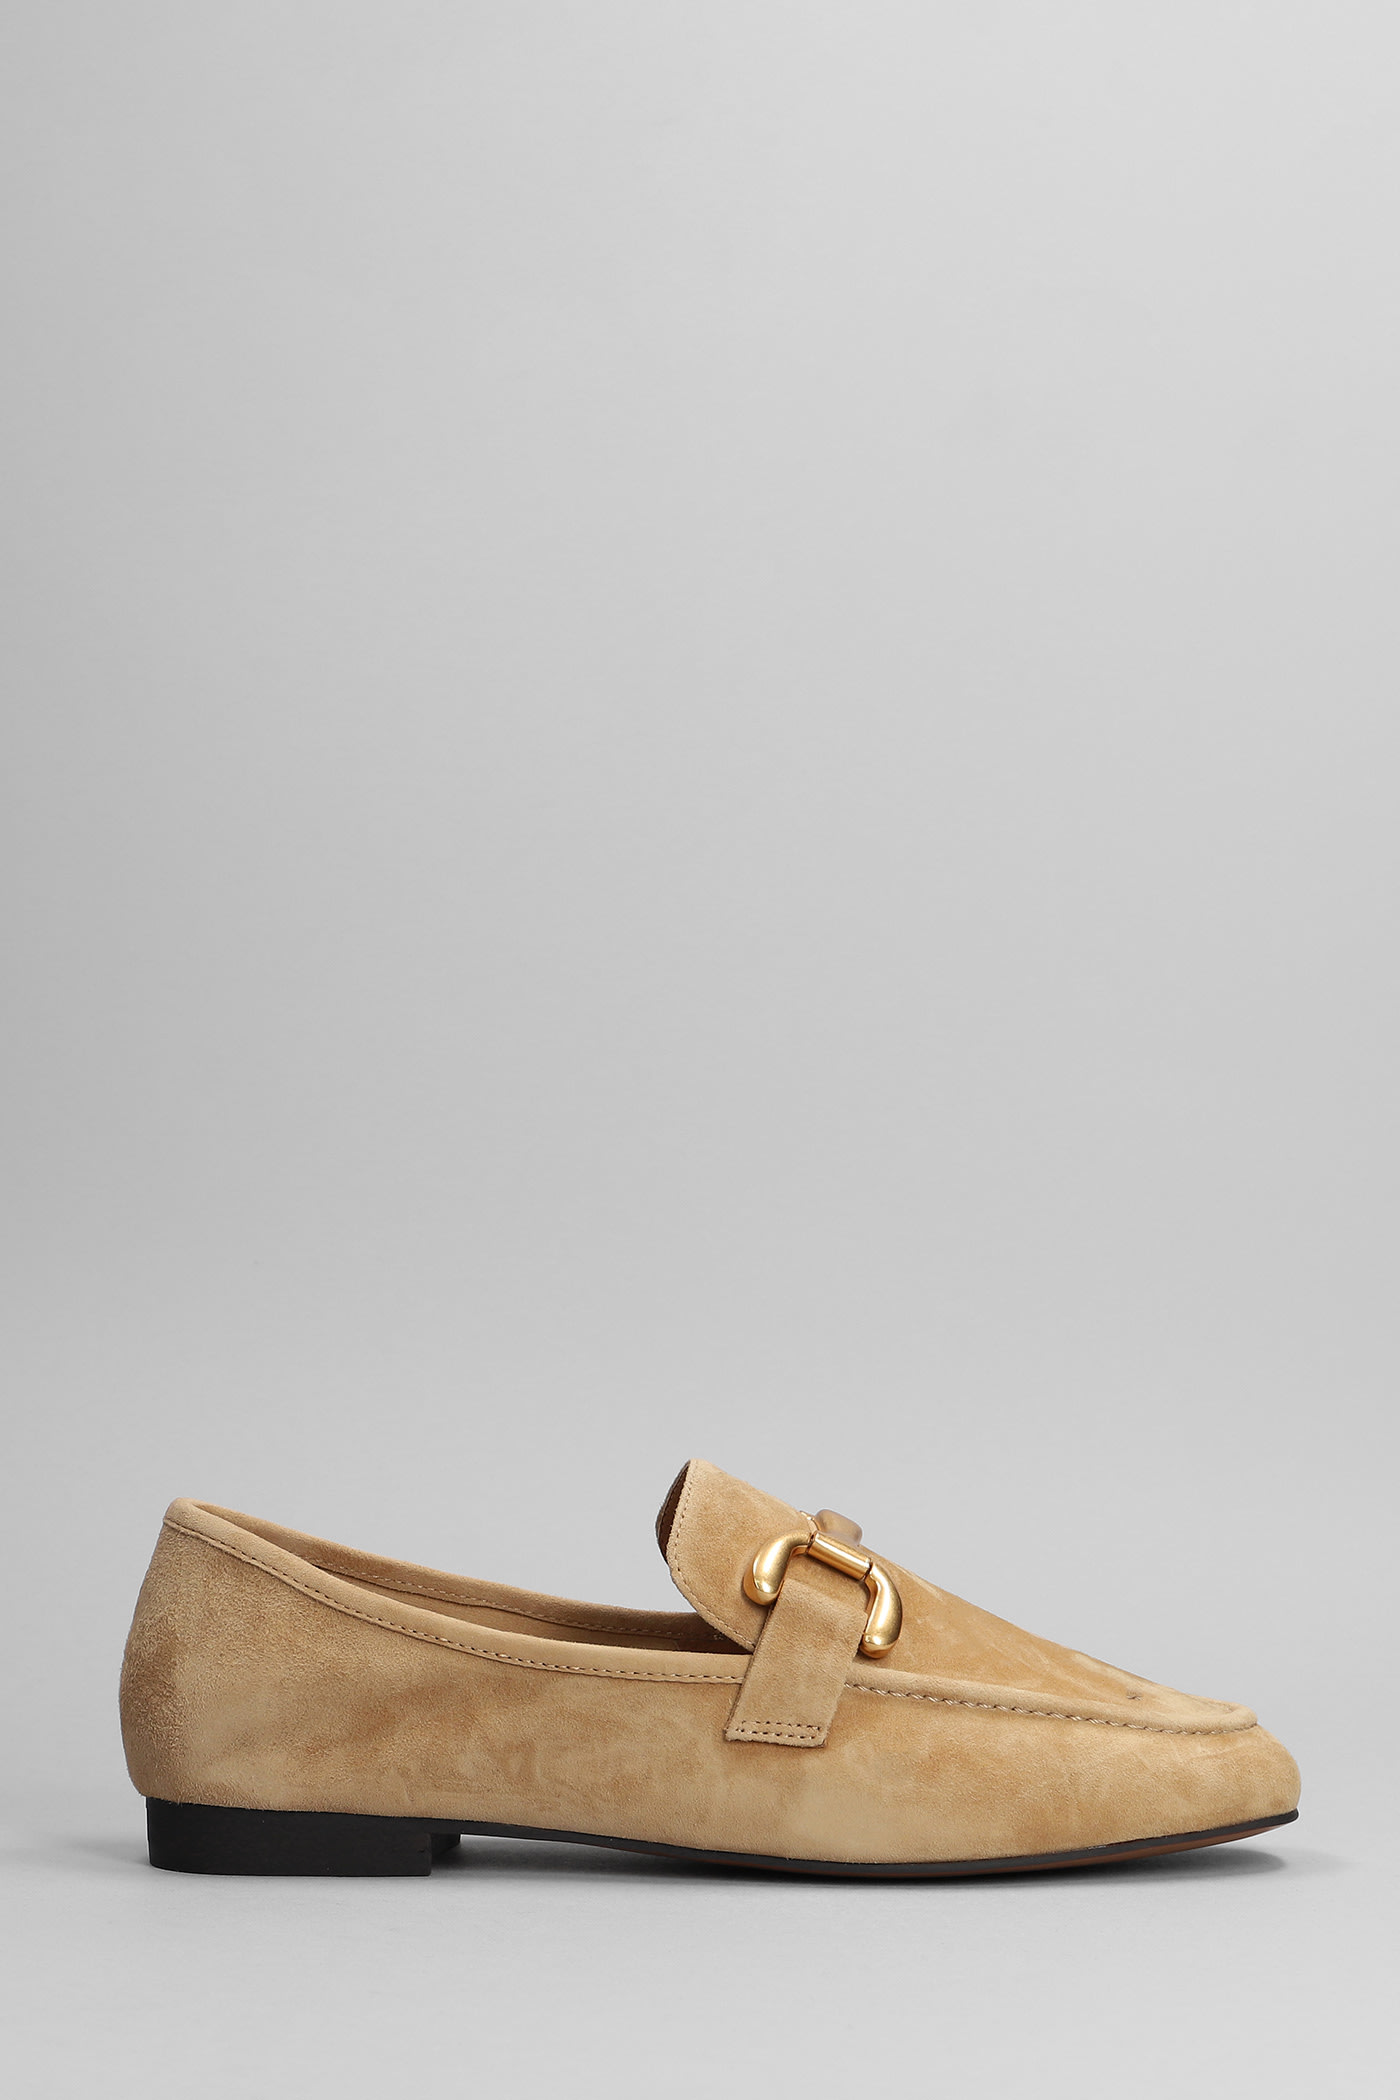 Bibi Lou Loafers In Camel Suede